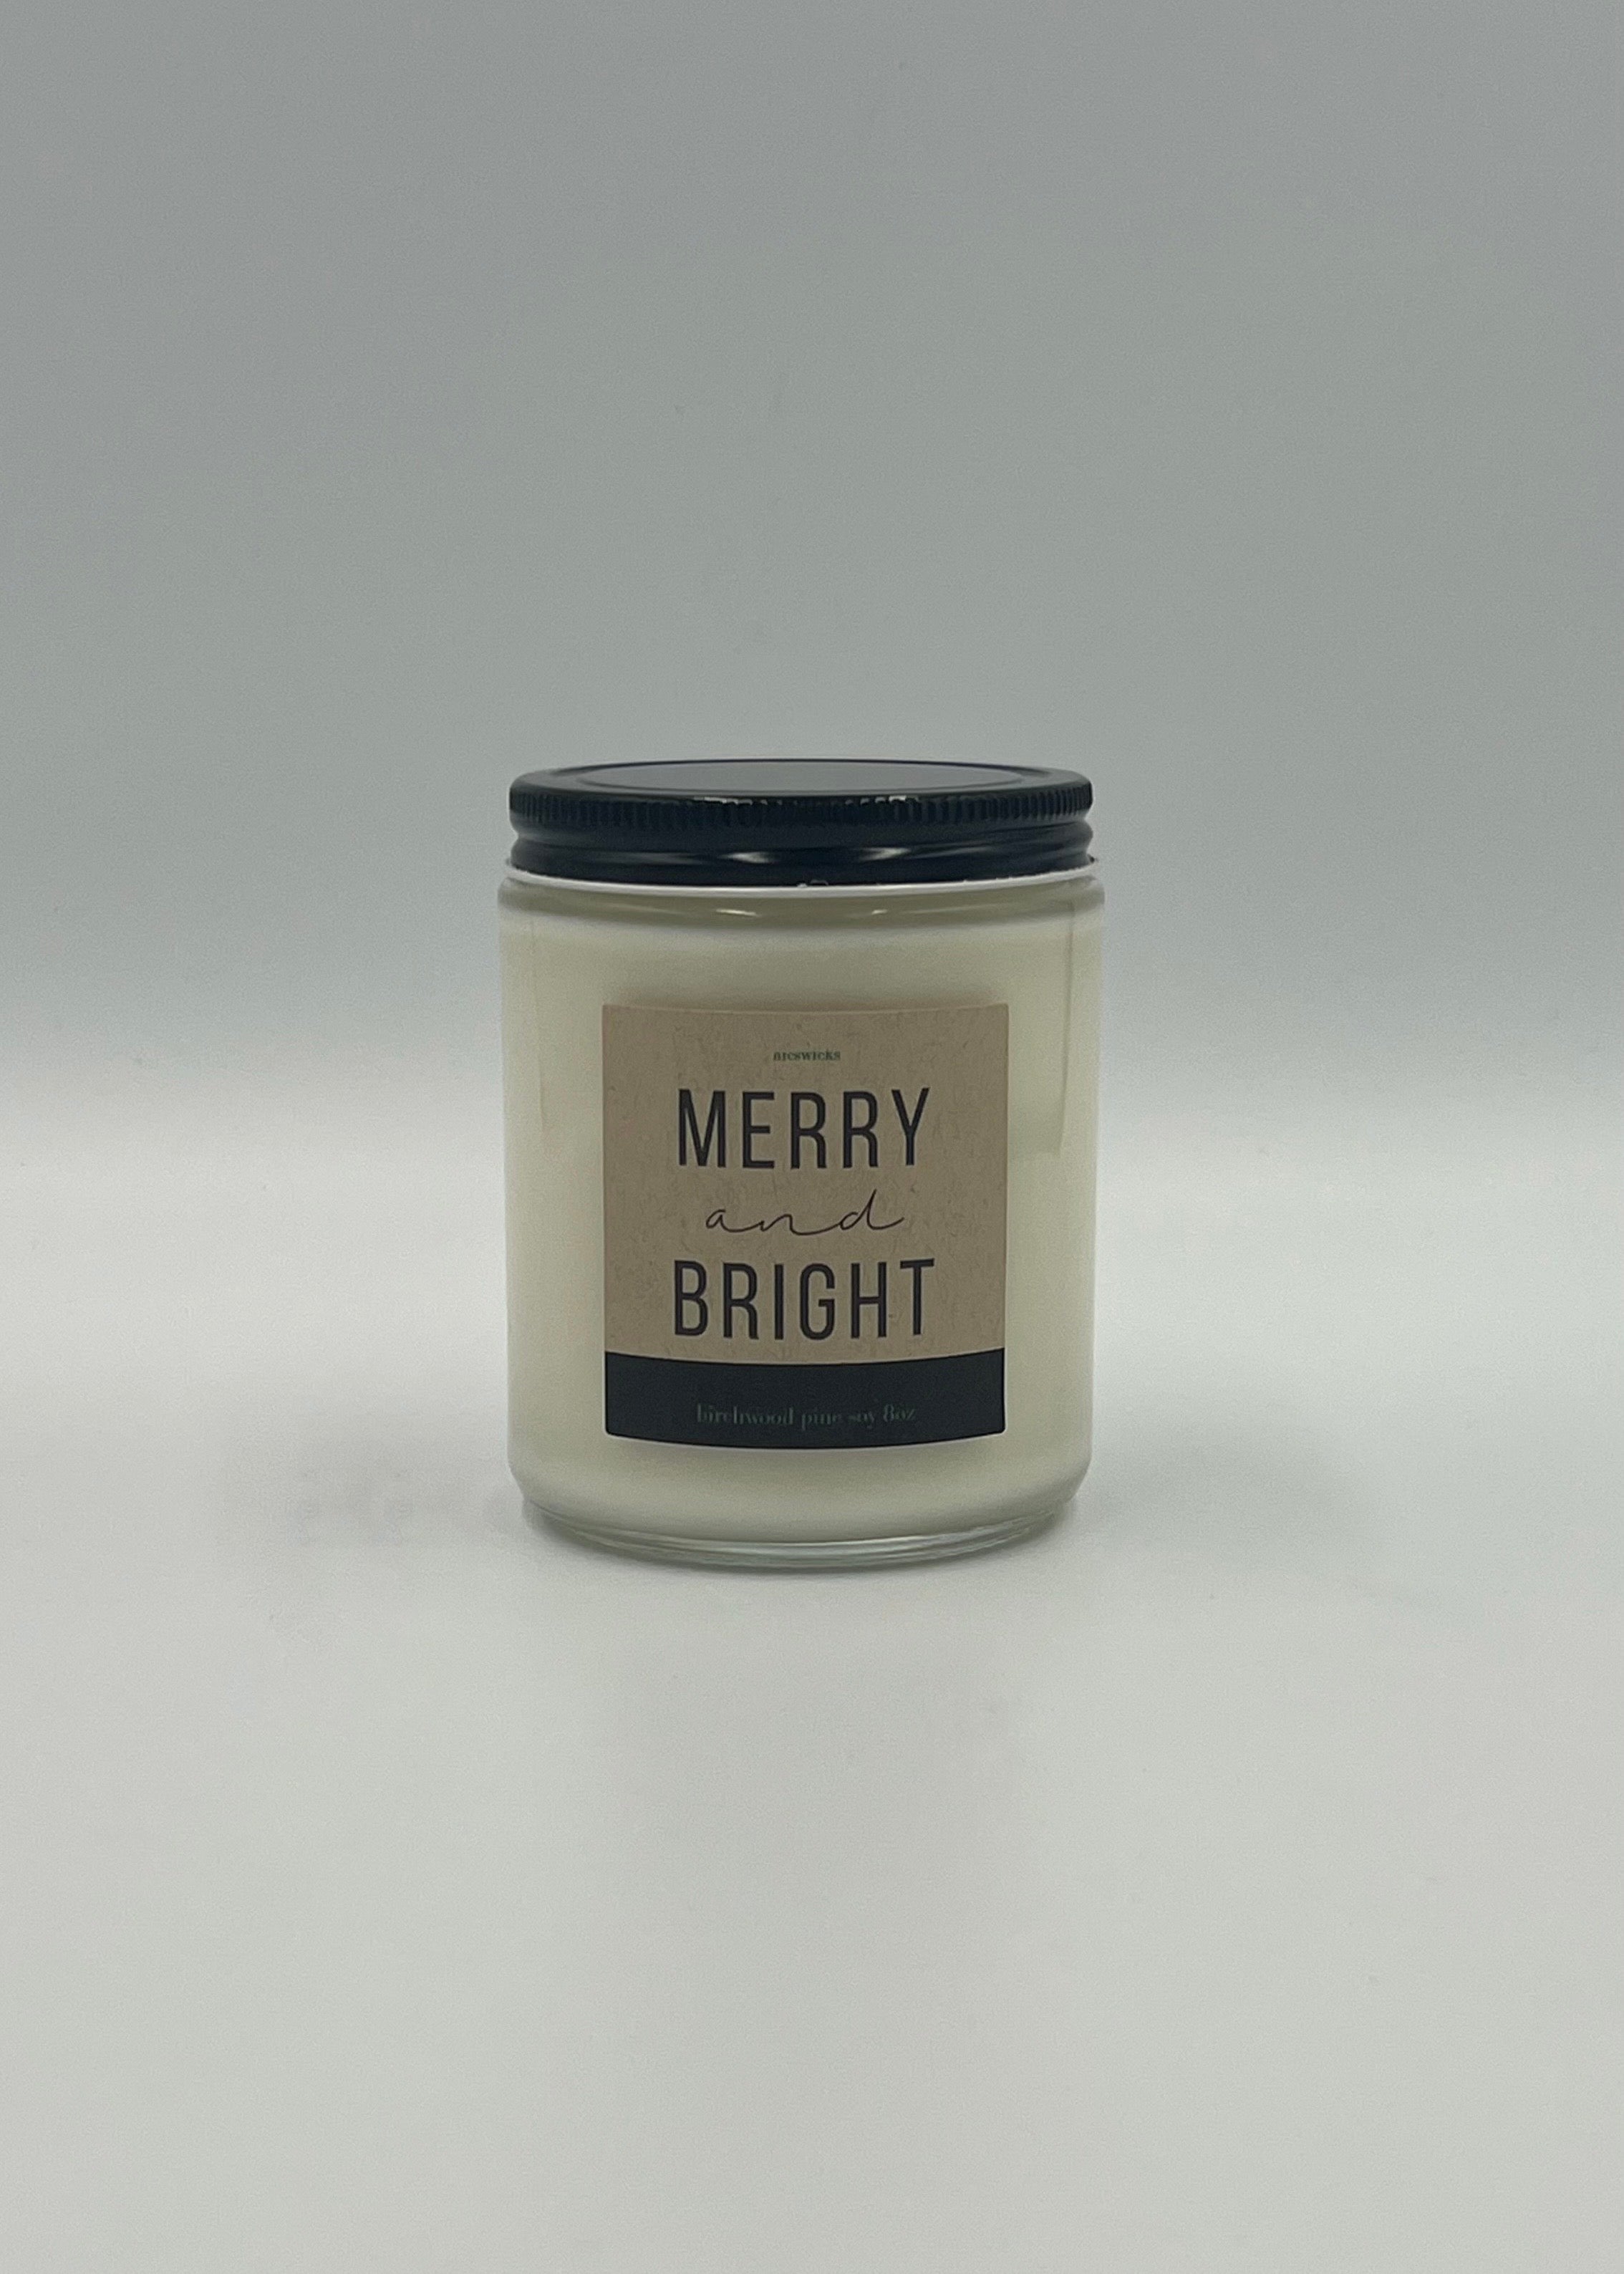 Candle - Merry and Bright 8oz